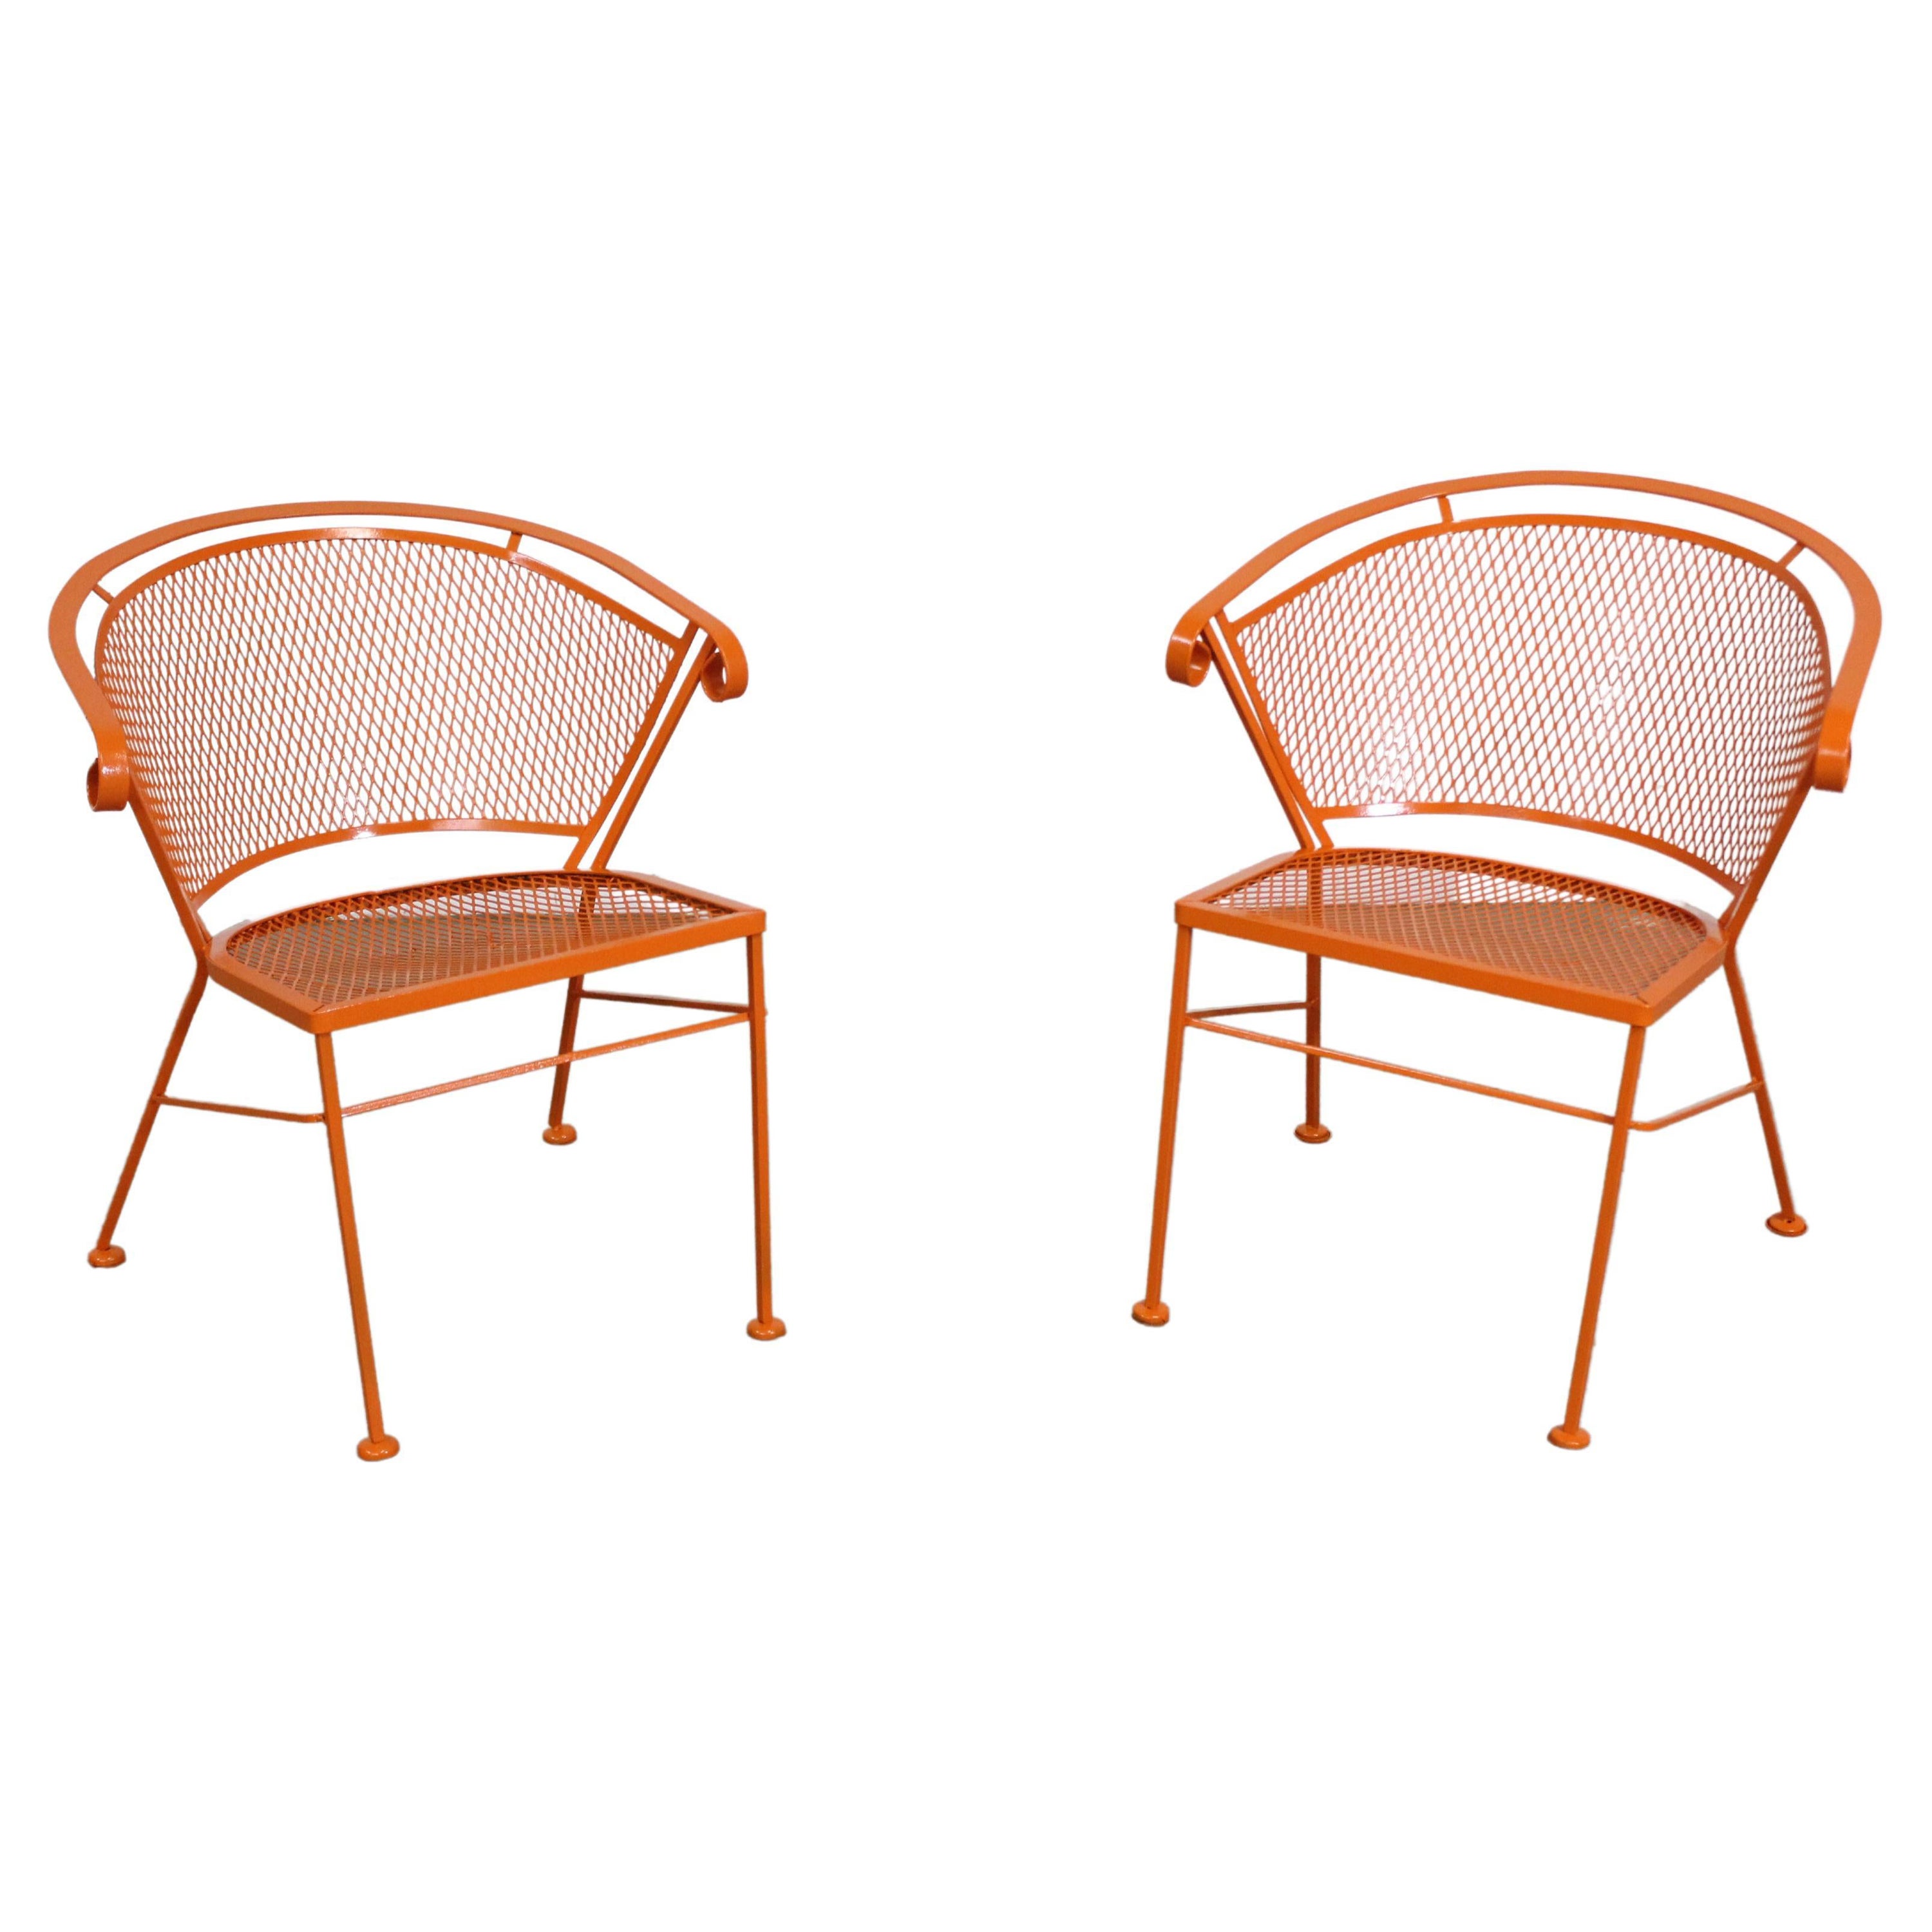 Pair of Mid-Century Modern Atomic Orange Outdoor Metal Curved Back Chairs